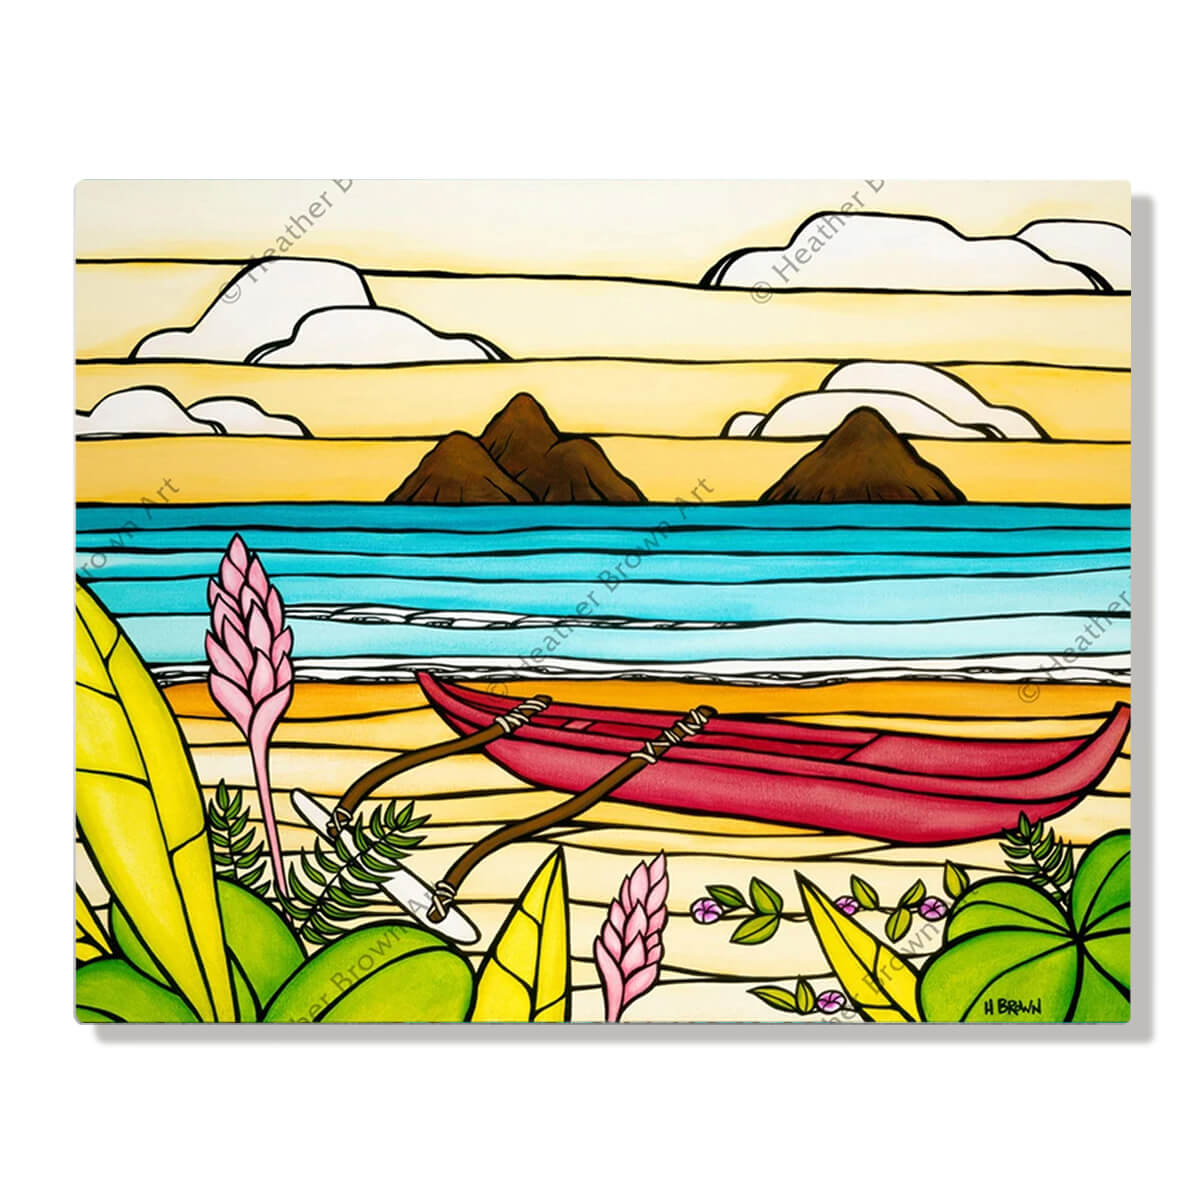 A metal art print featuring a beautiful summer day at the Mokes at Lanikai Beach by Hawaii surf artist Heather Brown